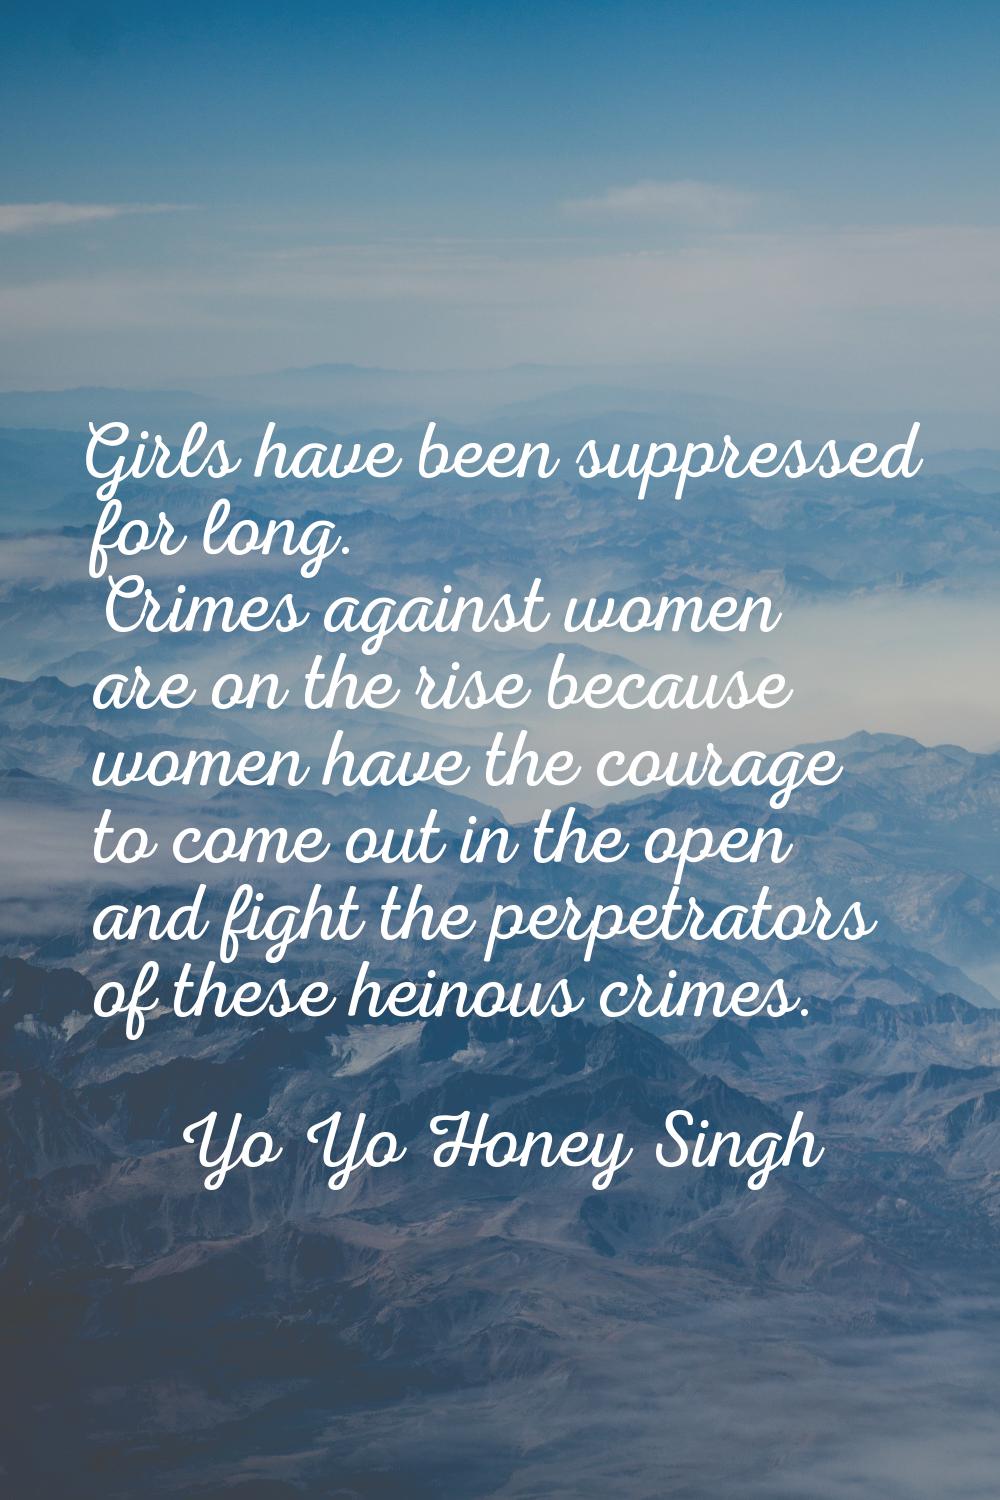 Girls have been suppressed for long. Crimes against women are on the rise because women have the co